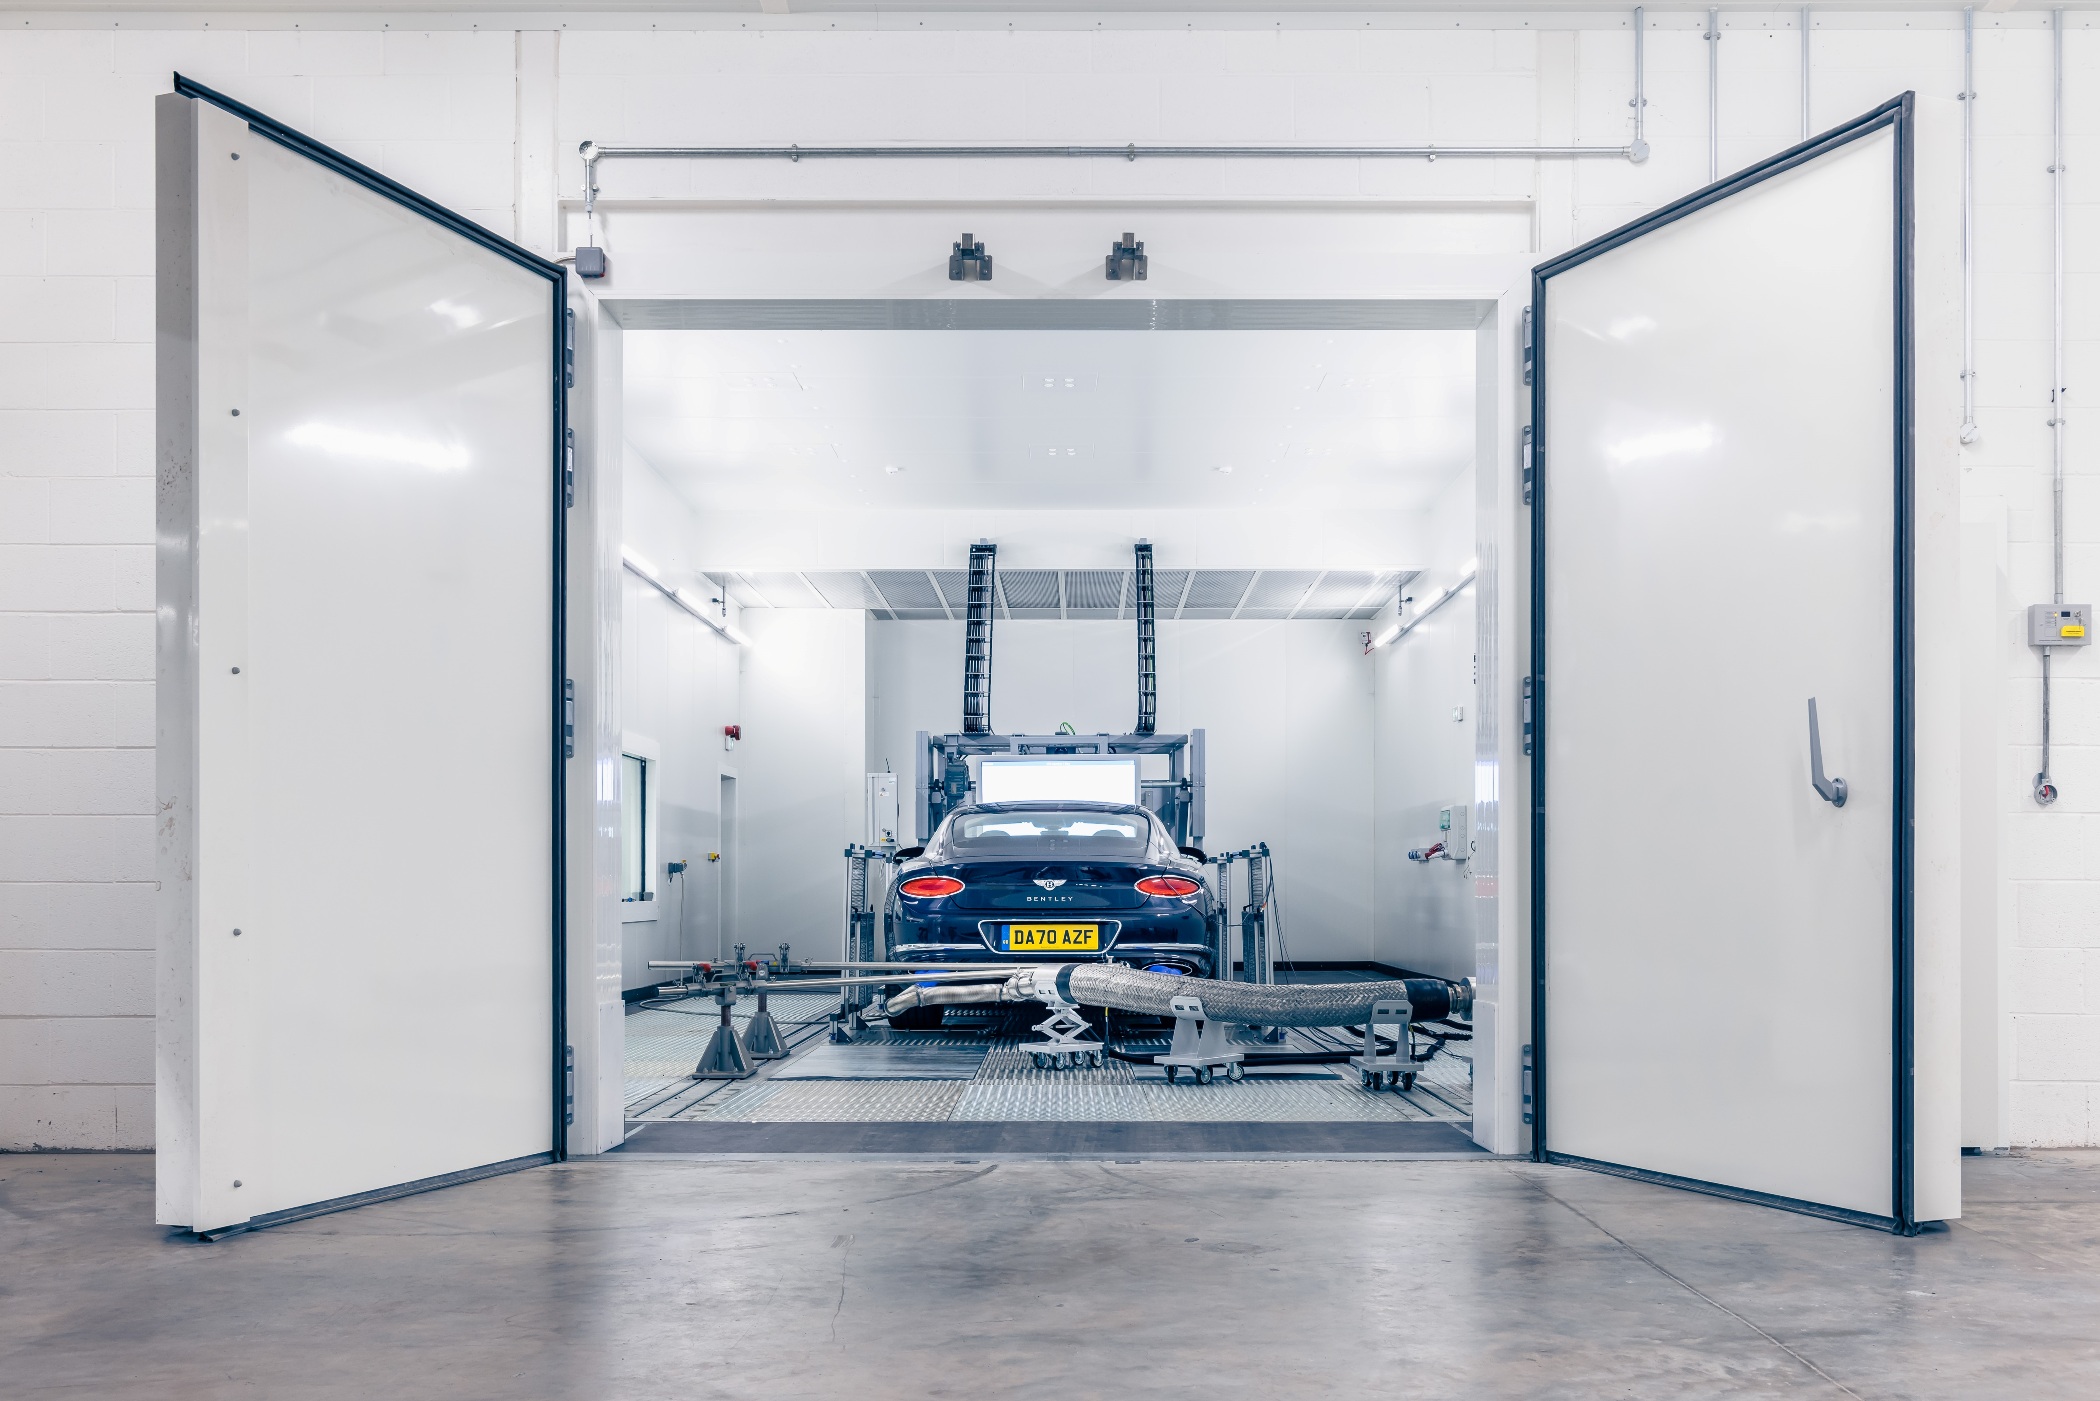 Climate controlled dynamometer takes pride of place at Bentley’s test centre in Crewe